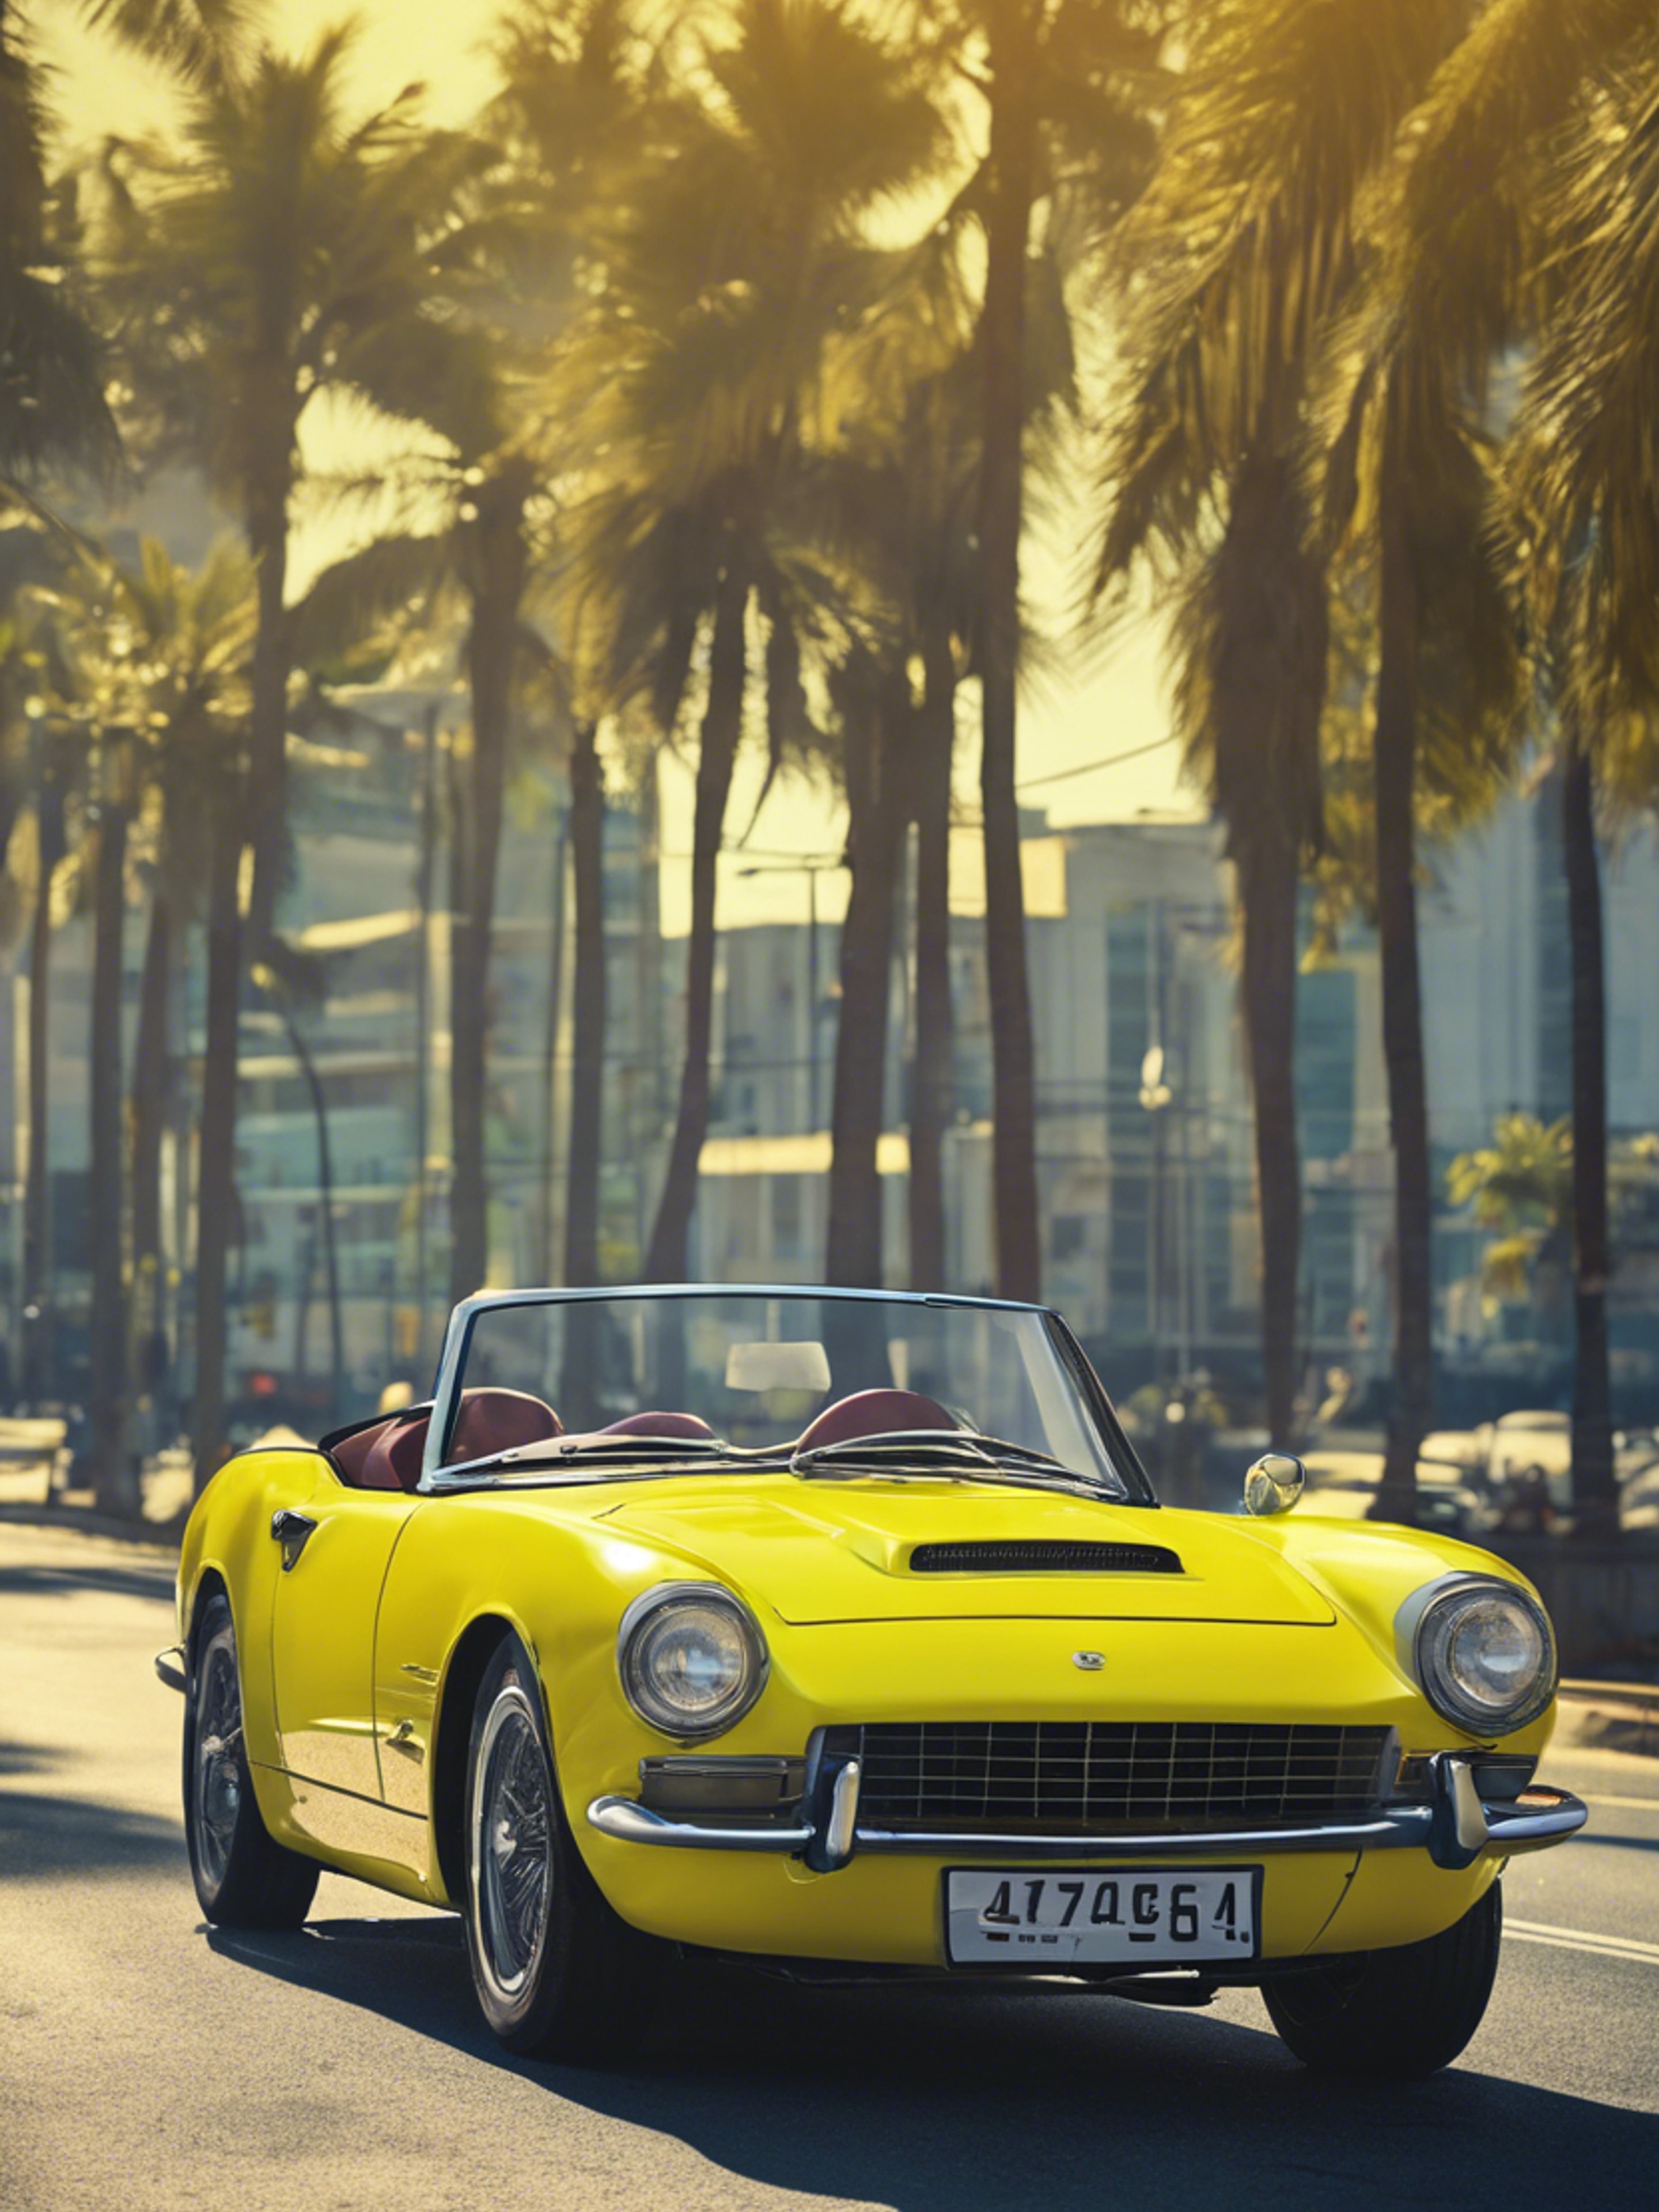 A convertible sports car in an intense shade of neon yellow speeding on a coastal road.壁紙[850ce204db8d4241b0df]